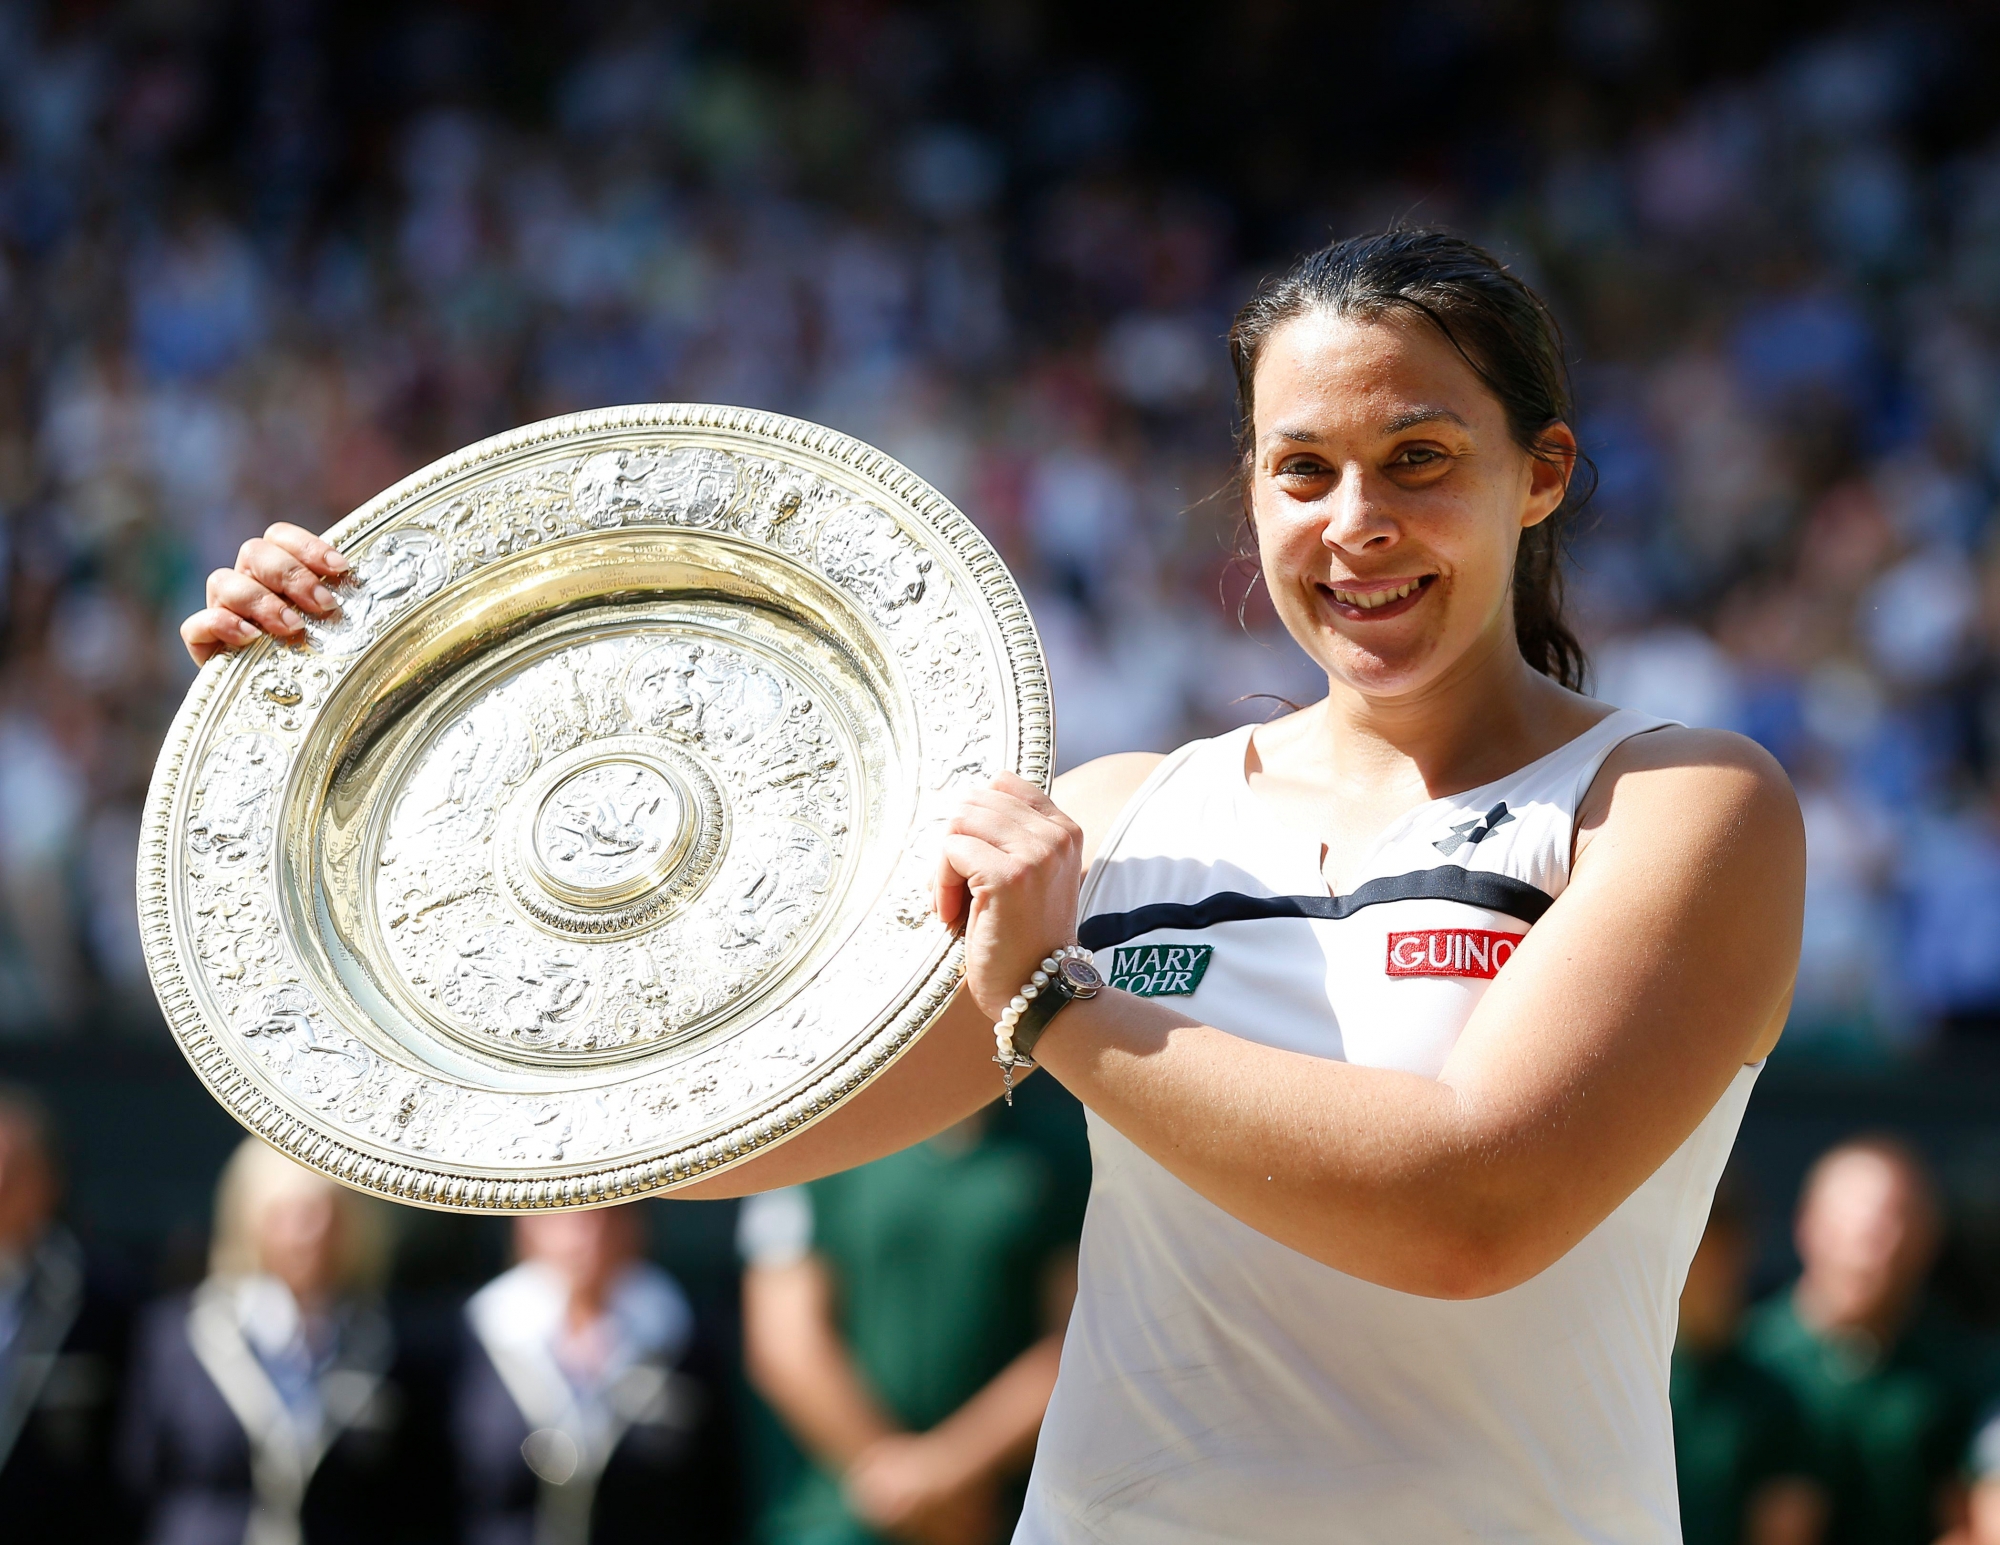 epa06399773 (FILES) Marion Bartoli of France hoists the championship trophy as she celebrates her victory over Sabine Lisicki of Germany in the women's final for the Wimbledon Championships at the All England Lawn Tennis Club, in London, Britain, 06 July 2013.  Bartoli, who retired from professional tennis shortly after winning the title, announced her return to the WTA Tour 20 December 2017.  EPA/KERIM OKTEN EDITORIAL USE ONLY/NO COMMERCIAL SALES FILES TENNIS MARION BARTOLI